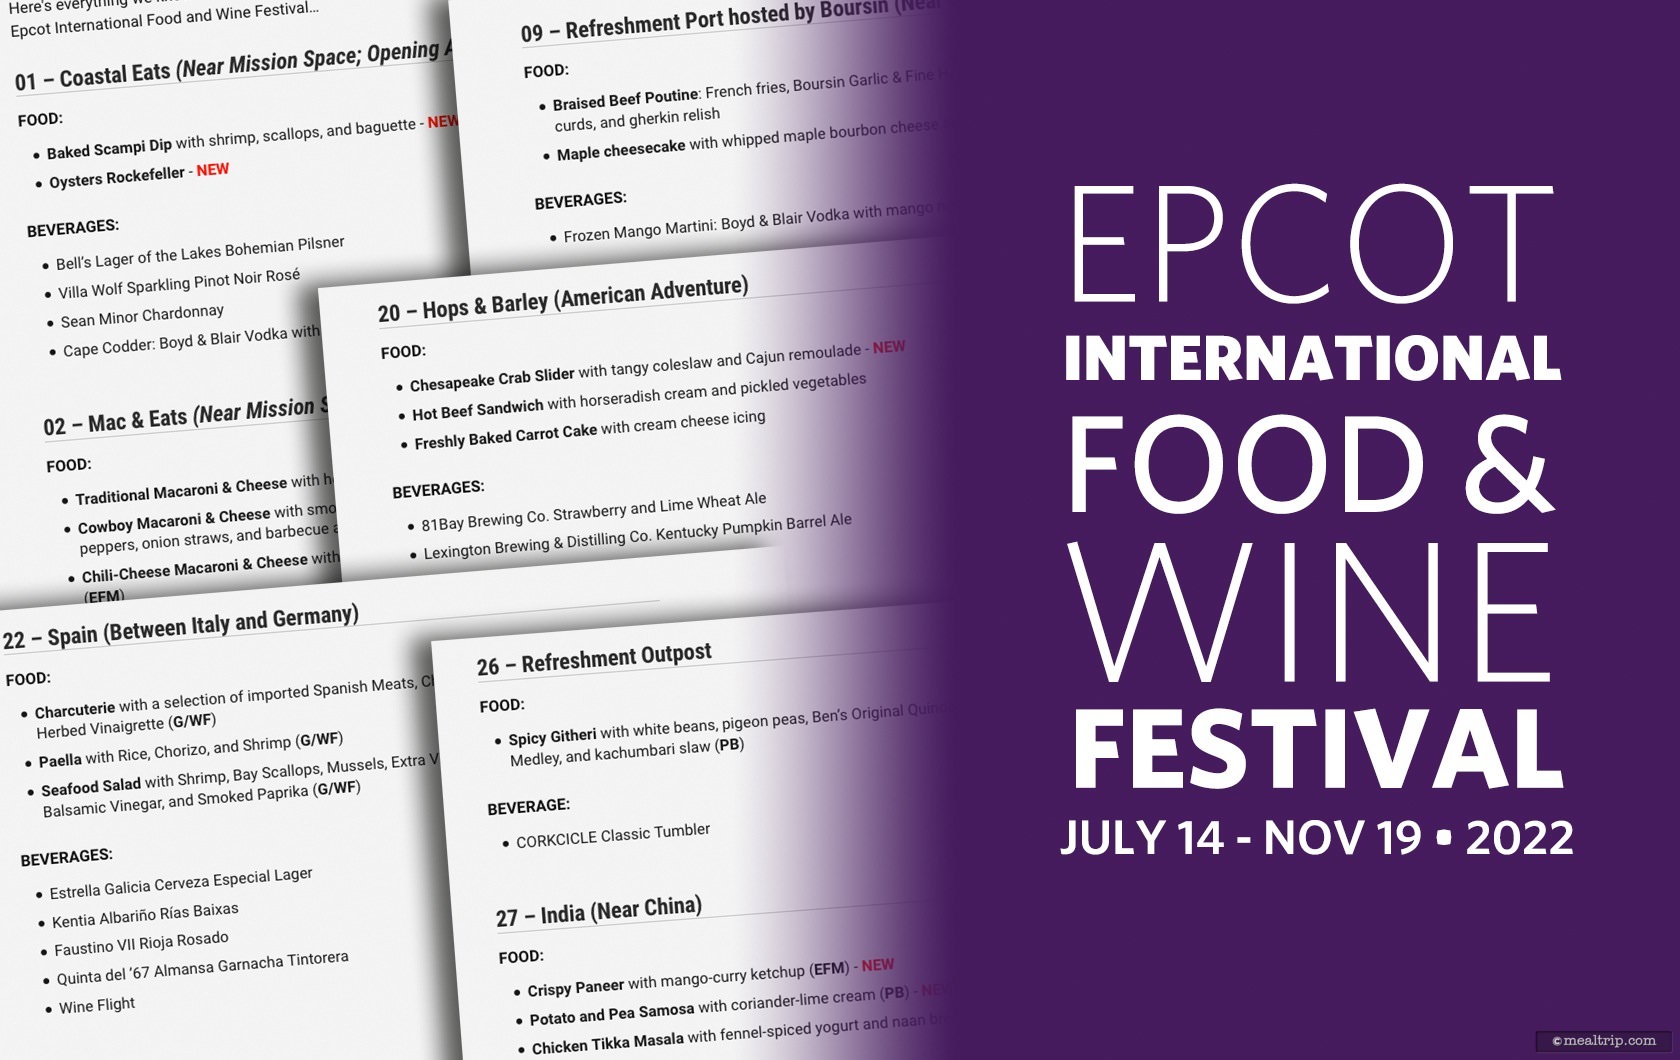 Food Menu Items for the 2022 Epcot International Food & Wine Festival (Text List)